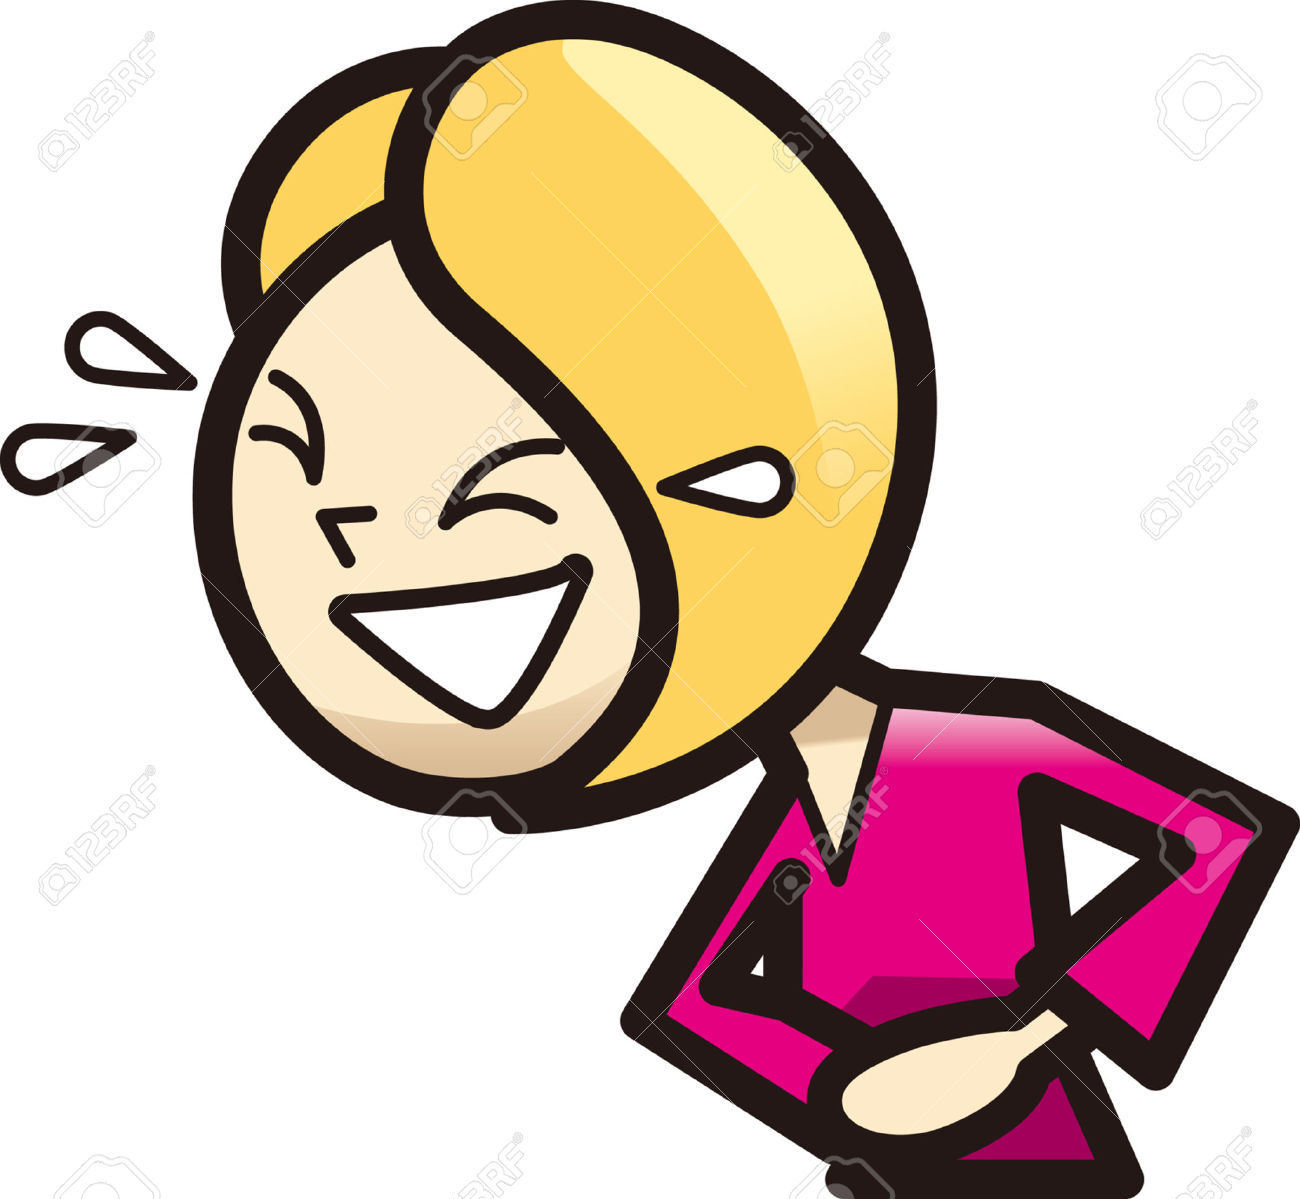 baby laughing clipart - photo #14